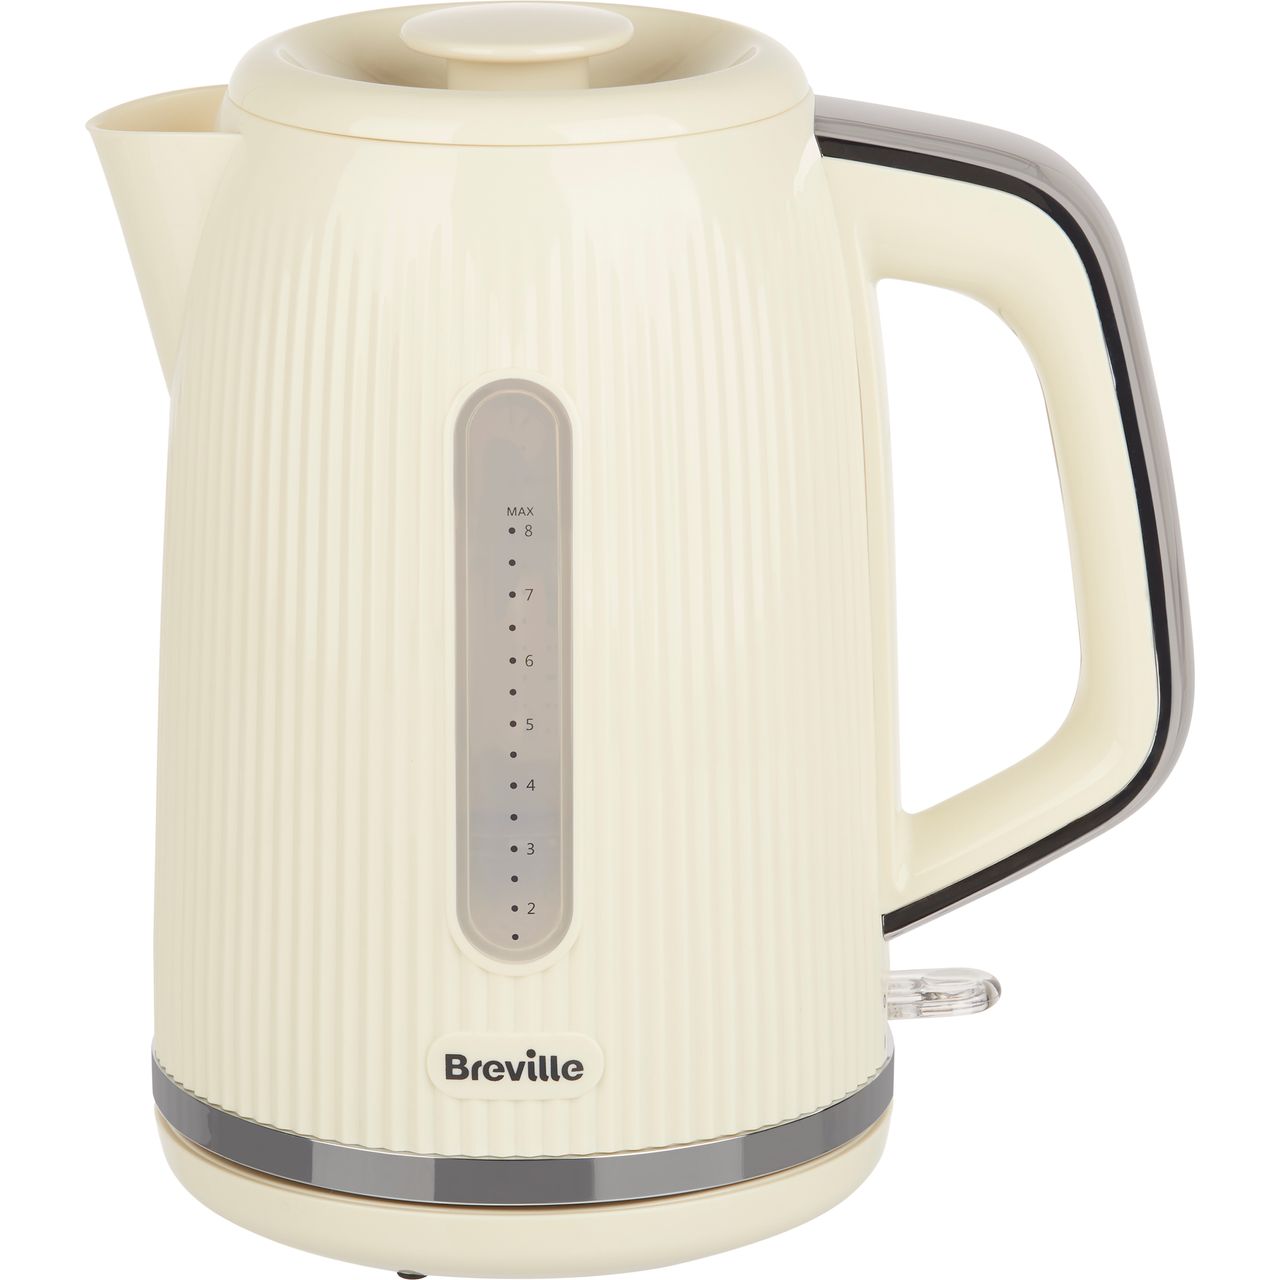 Breville Breville Bold Collection Cream Electric Cordless Jug Kettle 